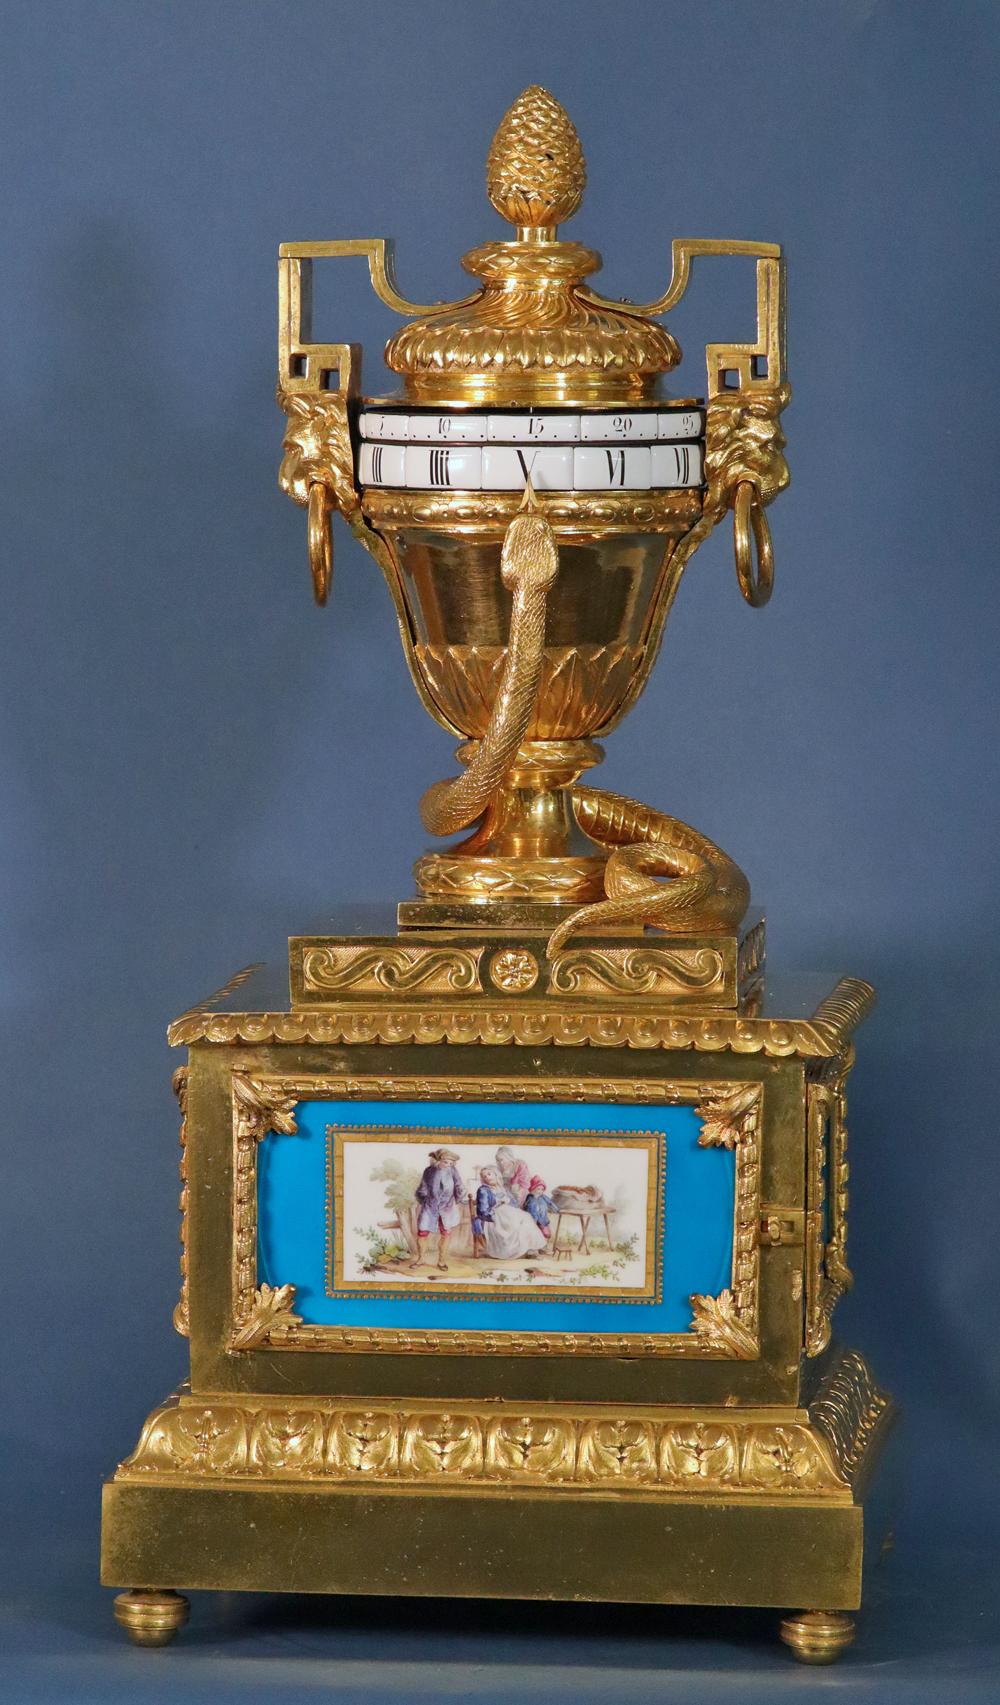 Louis XVI Ormolu Annular Clock with Sevres Panels. 
 
The ormolu case has a large urn flanked by lions with rings, a fluted top with a pinecone finial, a stepped case with burnished sides and a large well-cast ormolu snake that points to the time.